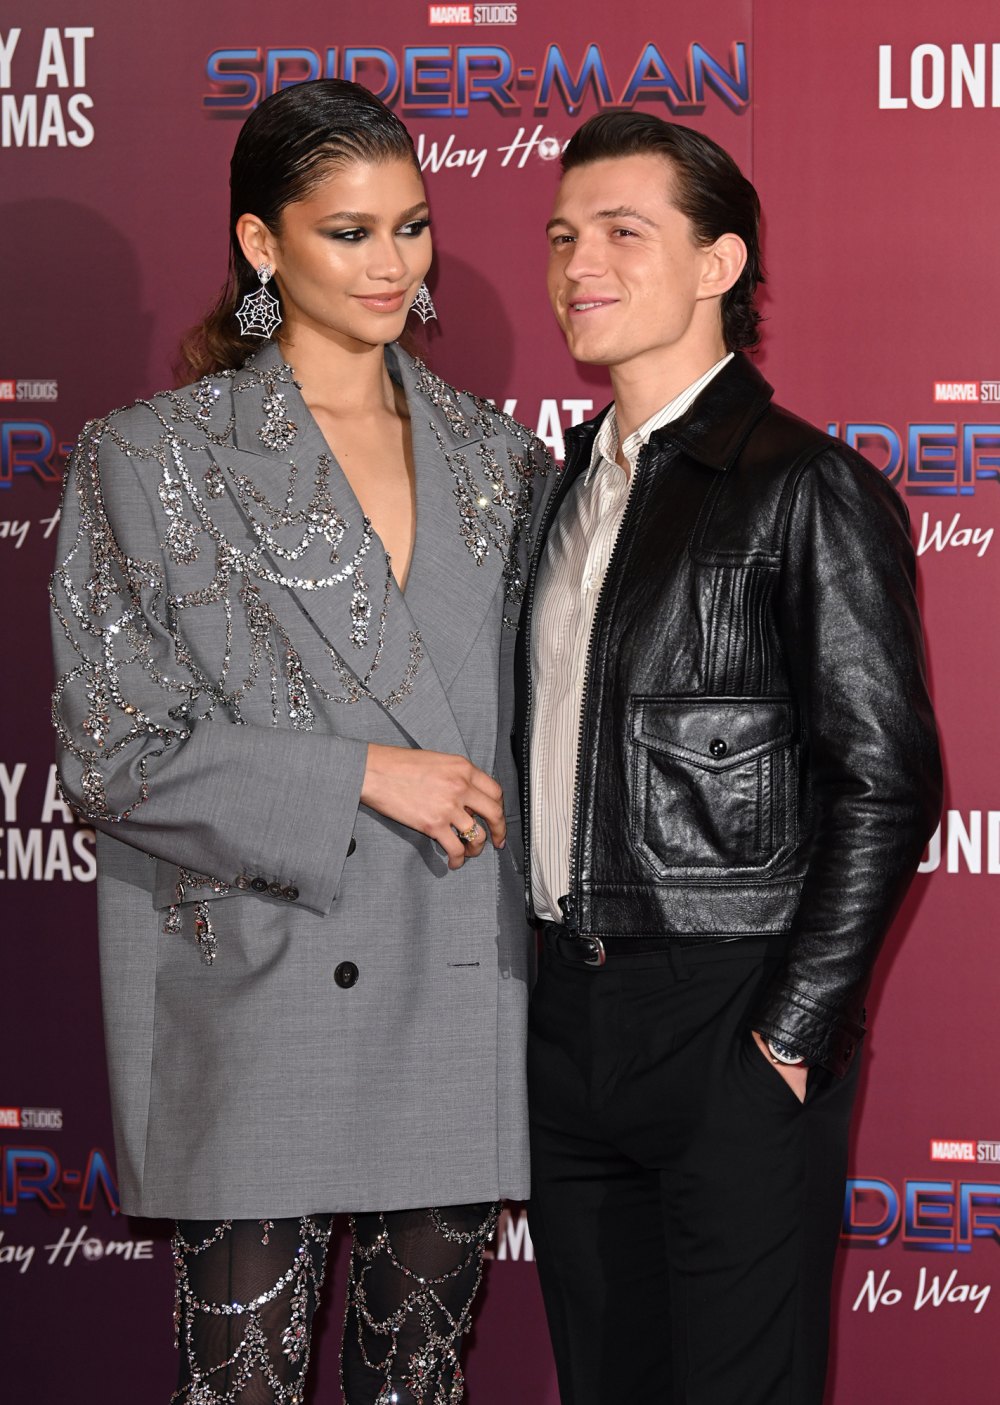 Tom Holland, Zendaya Rewatch 'Spider-Man' Films to Relive Their Youth